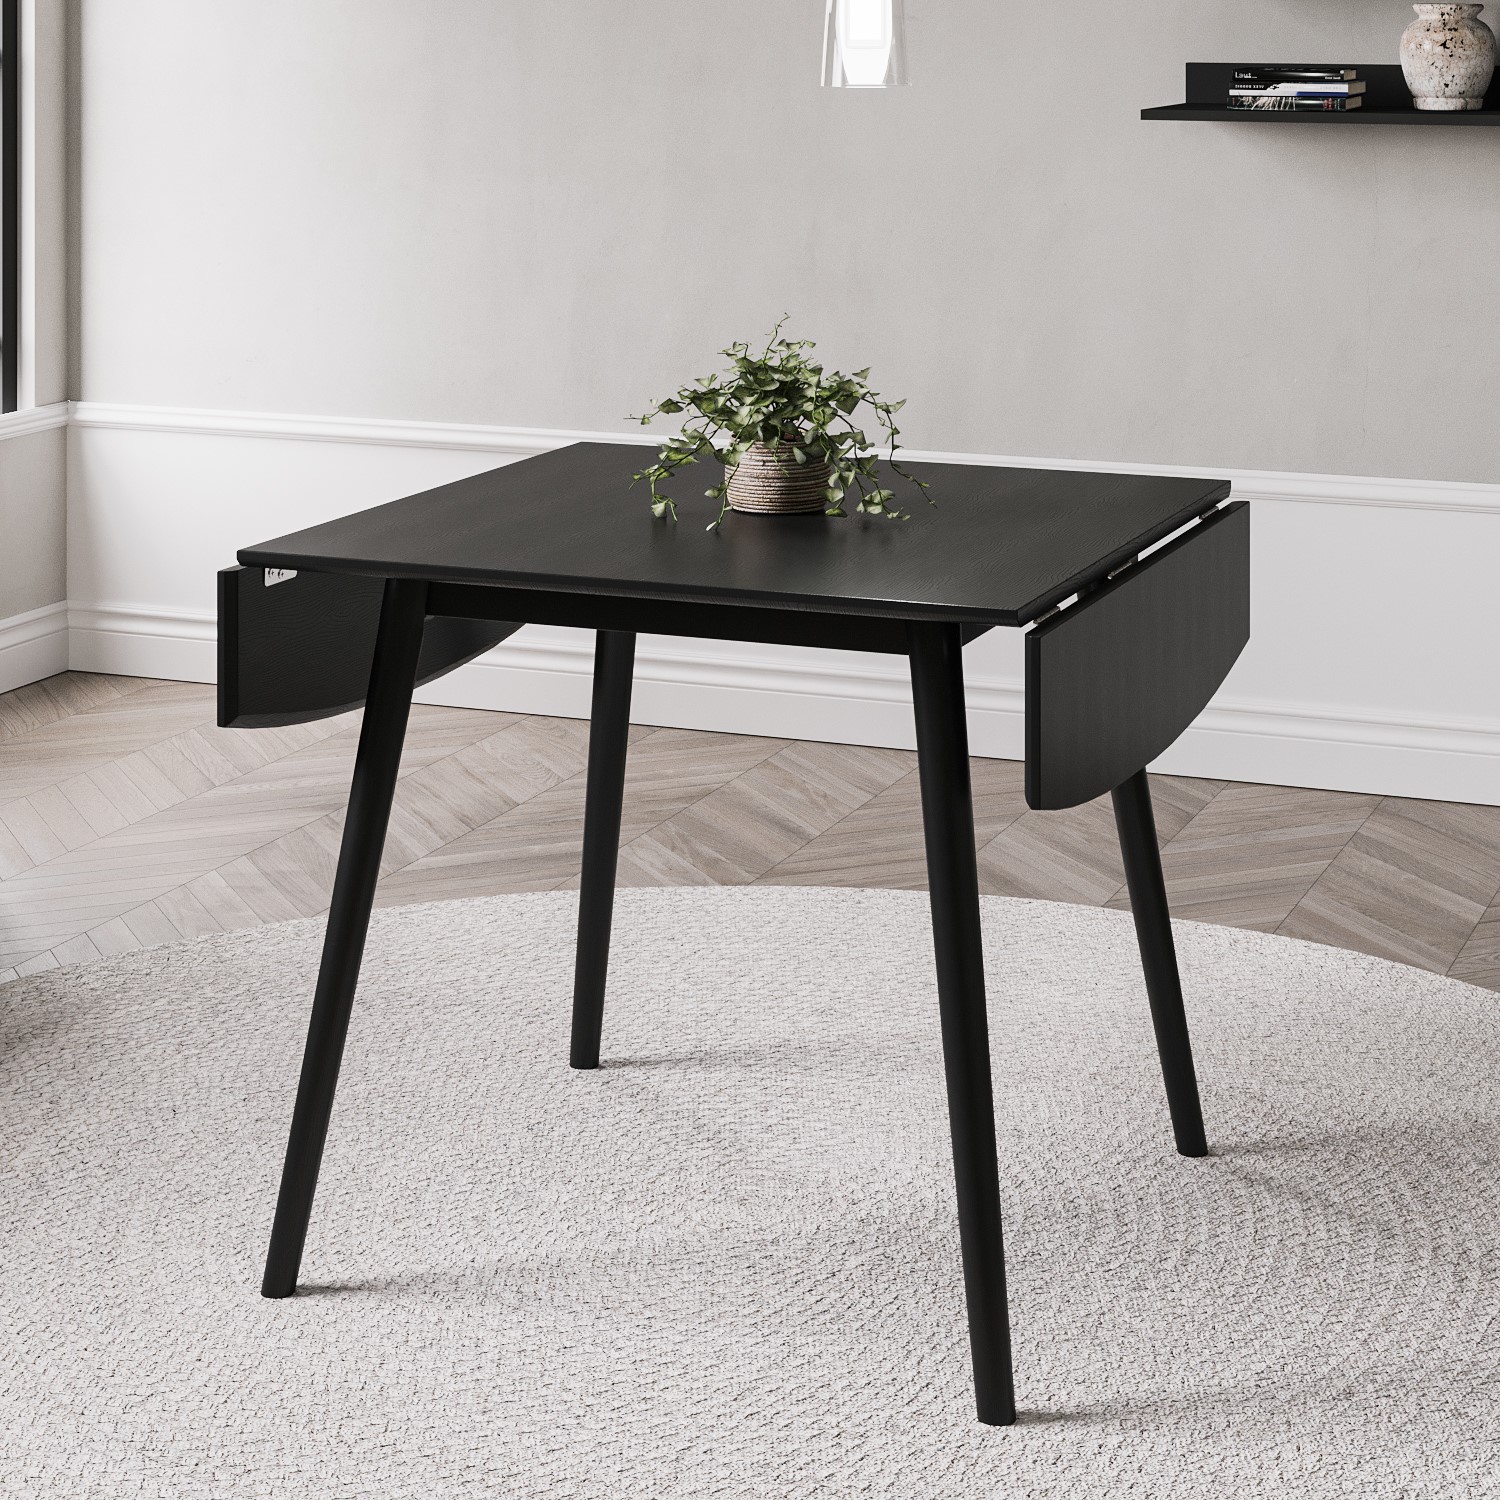 Photo of Small black wooden drop leaf dining table - seats 2-4 - olsen